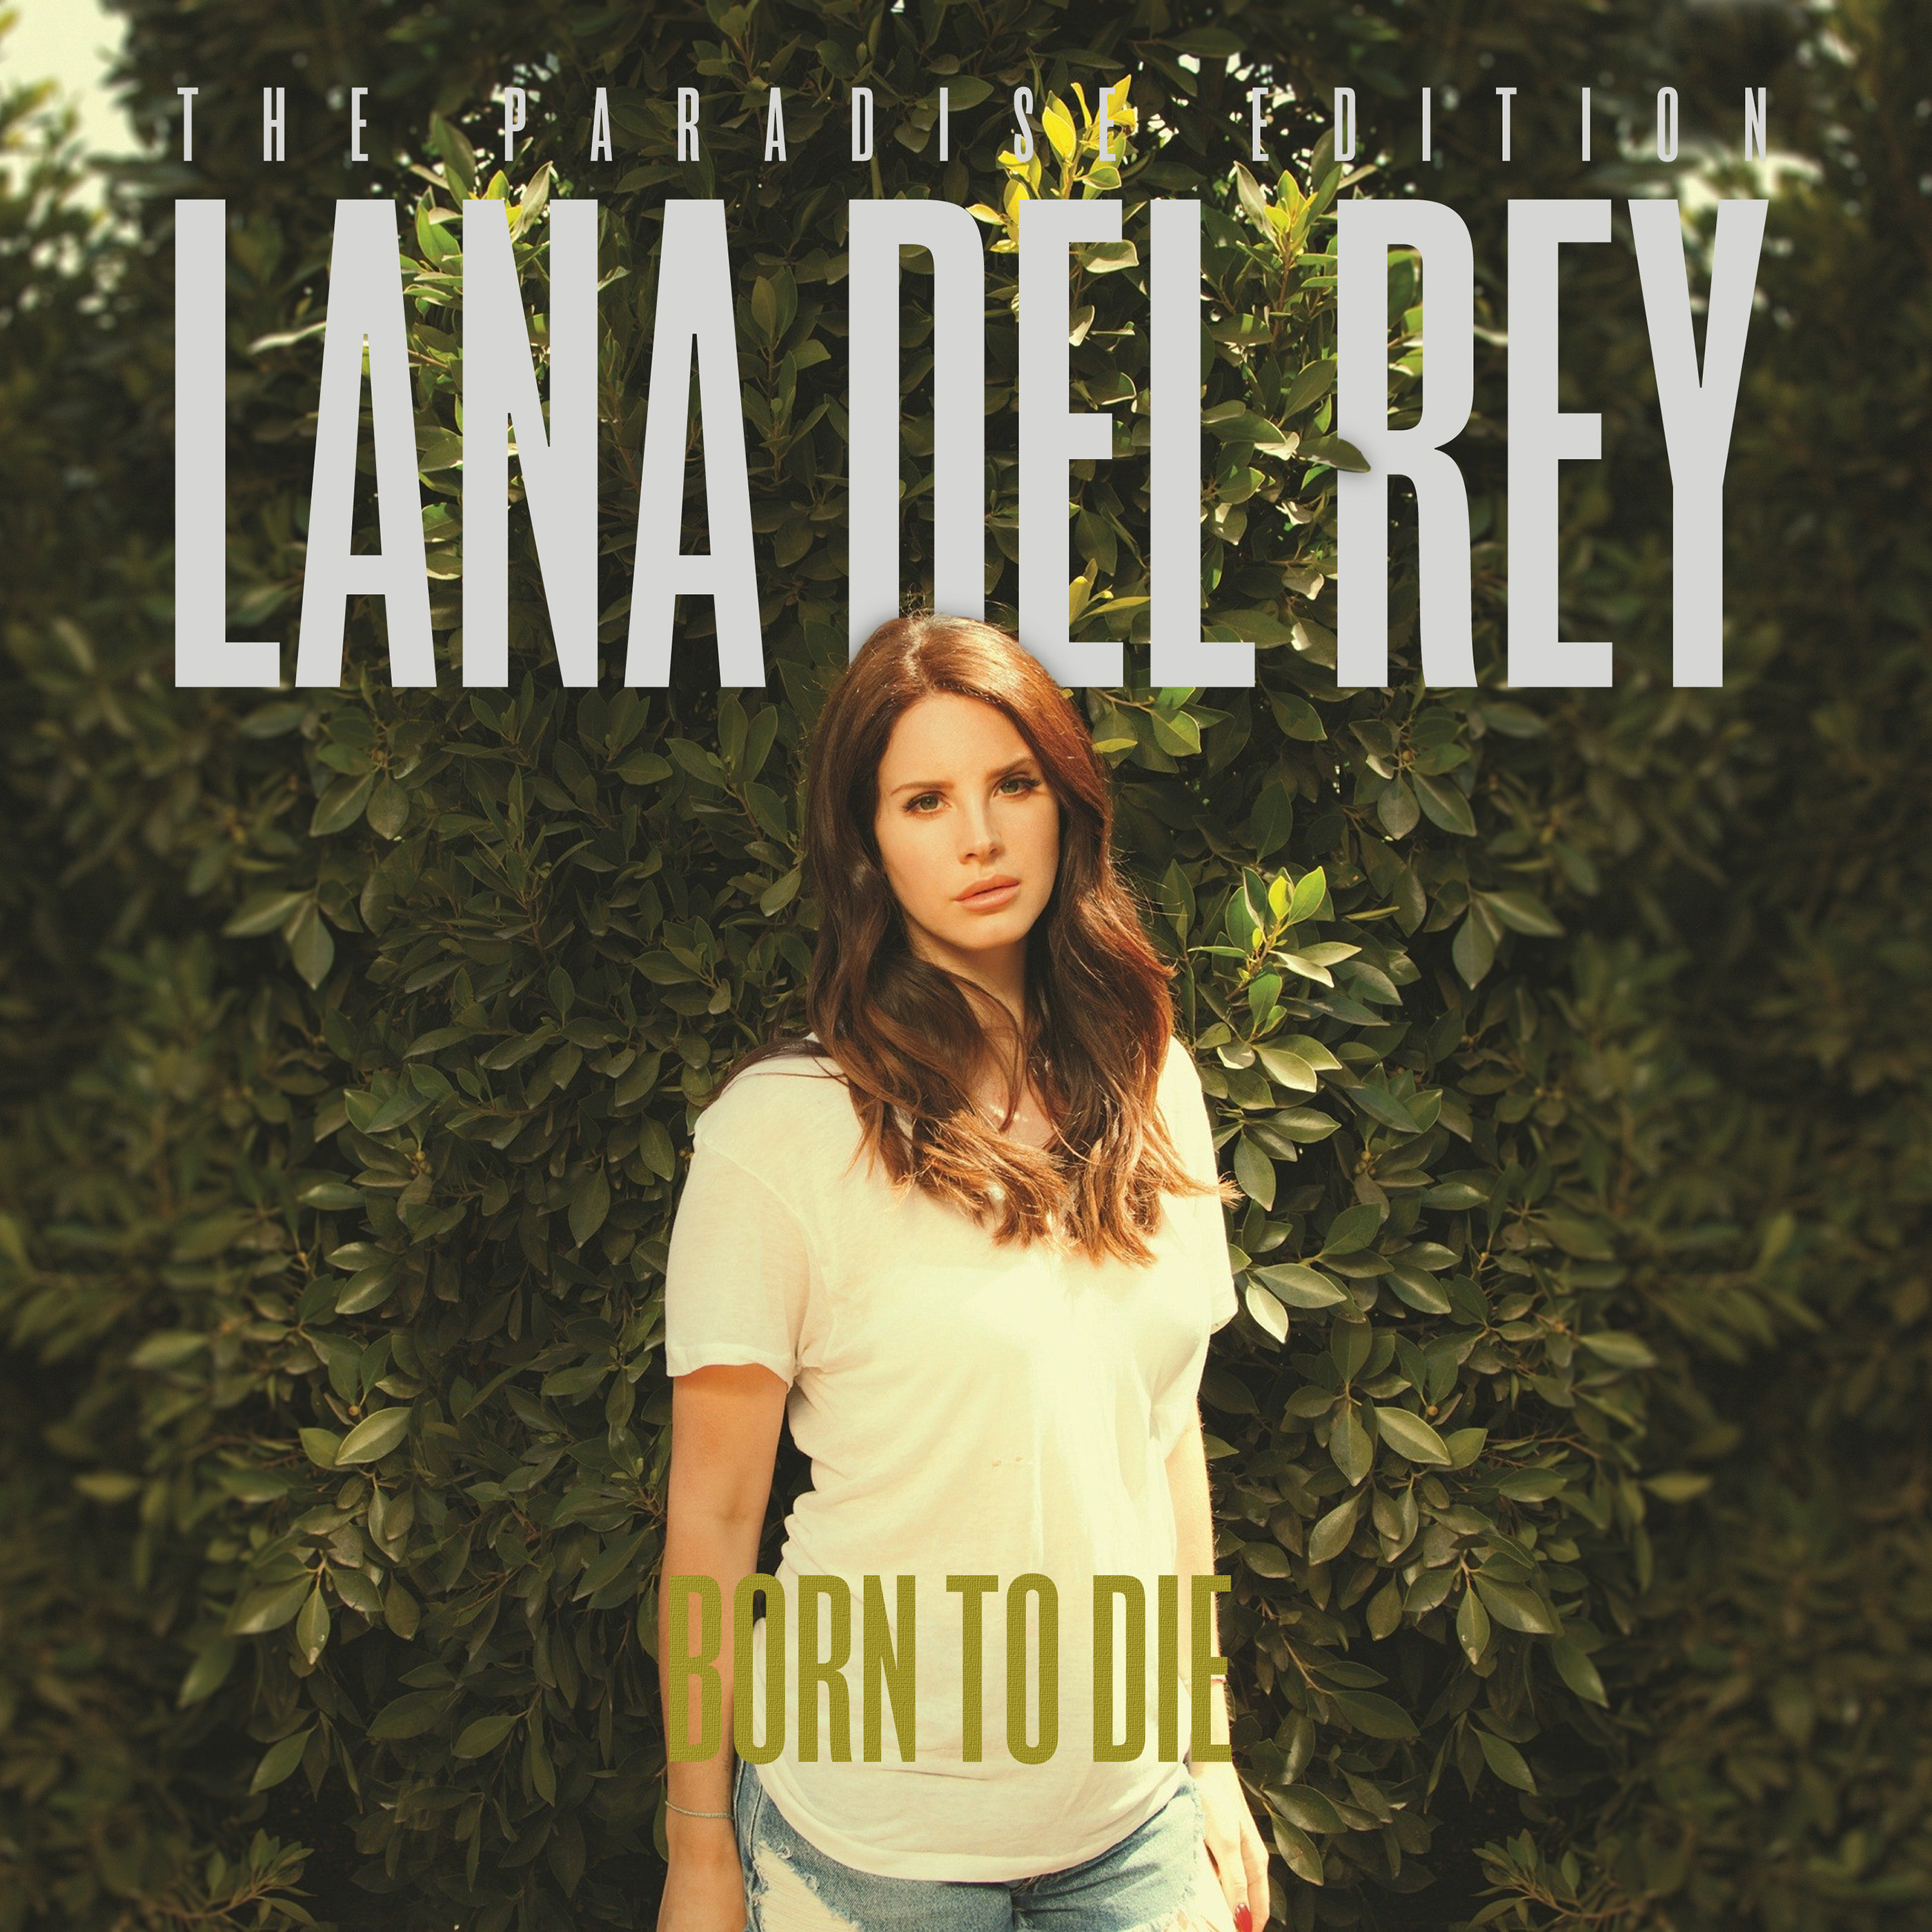 Lana Del Rey AlbumSingle Covers on Behance